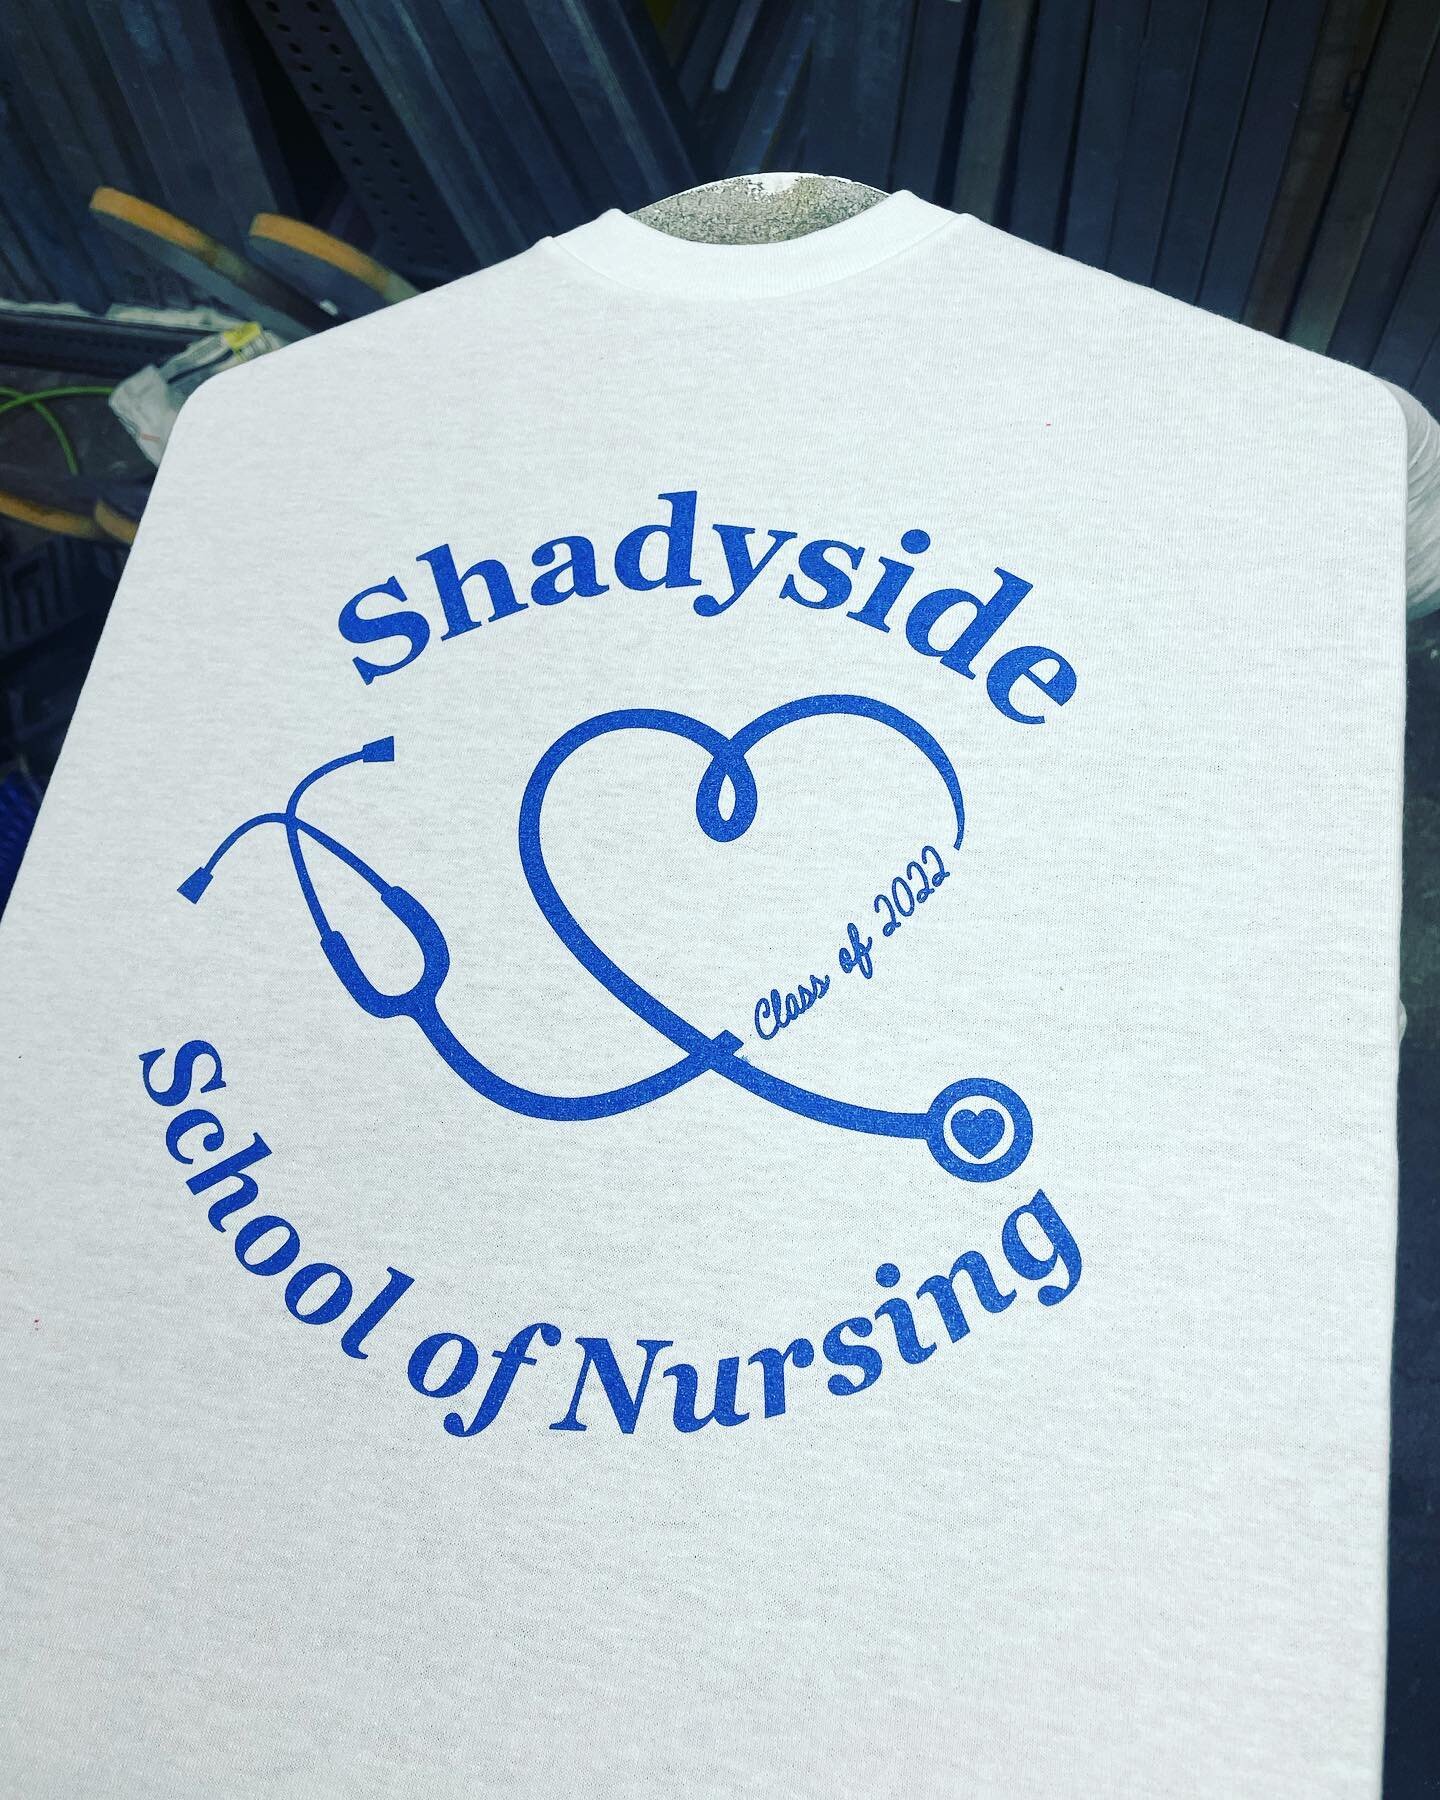 Congratulations to my wife and all of the graduating nurses this spring! 💪🏼💪🏼 
#pittsburgh #screenprinting #nurse #customshirts